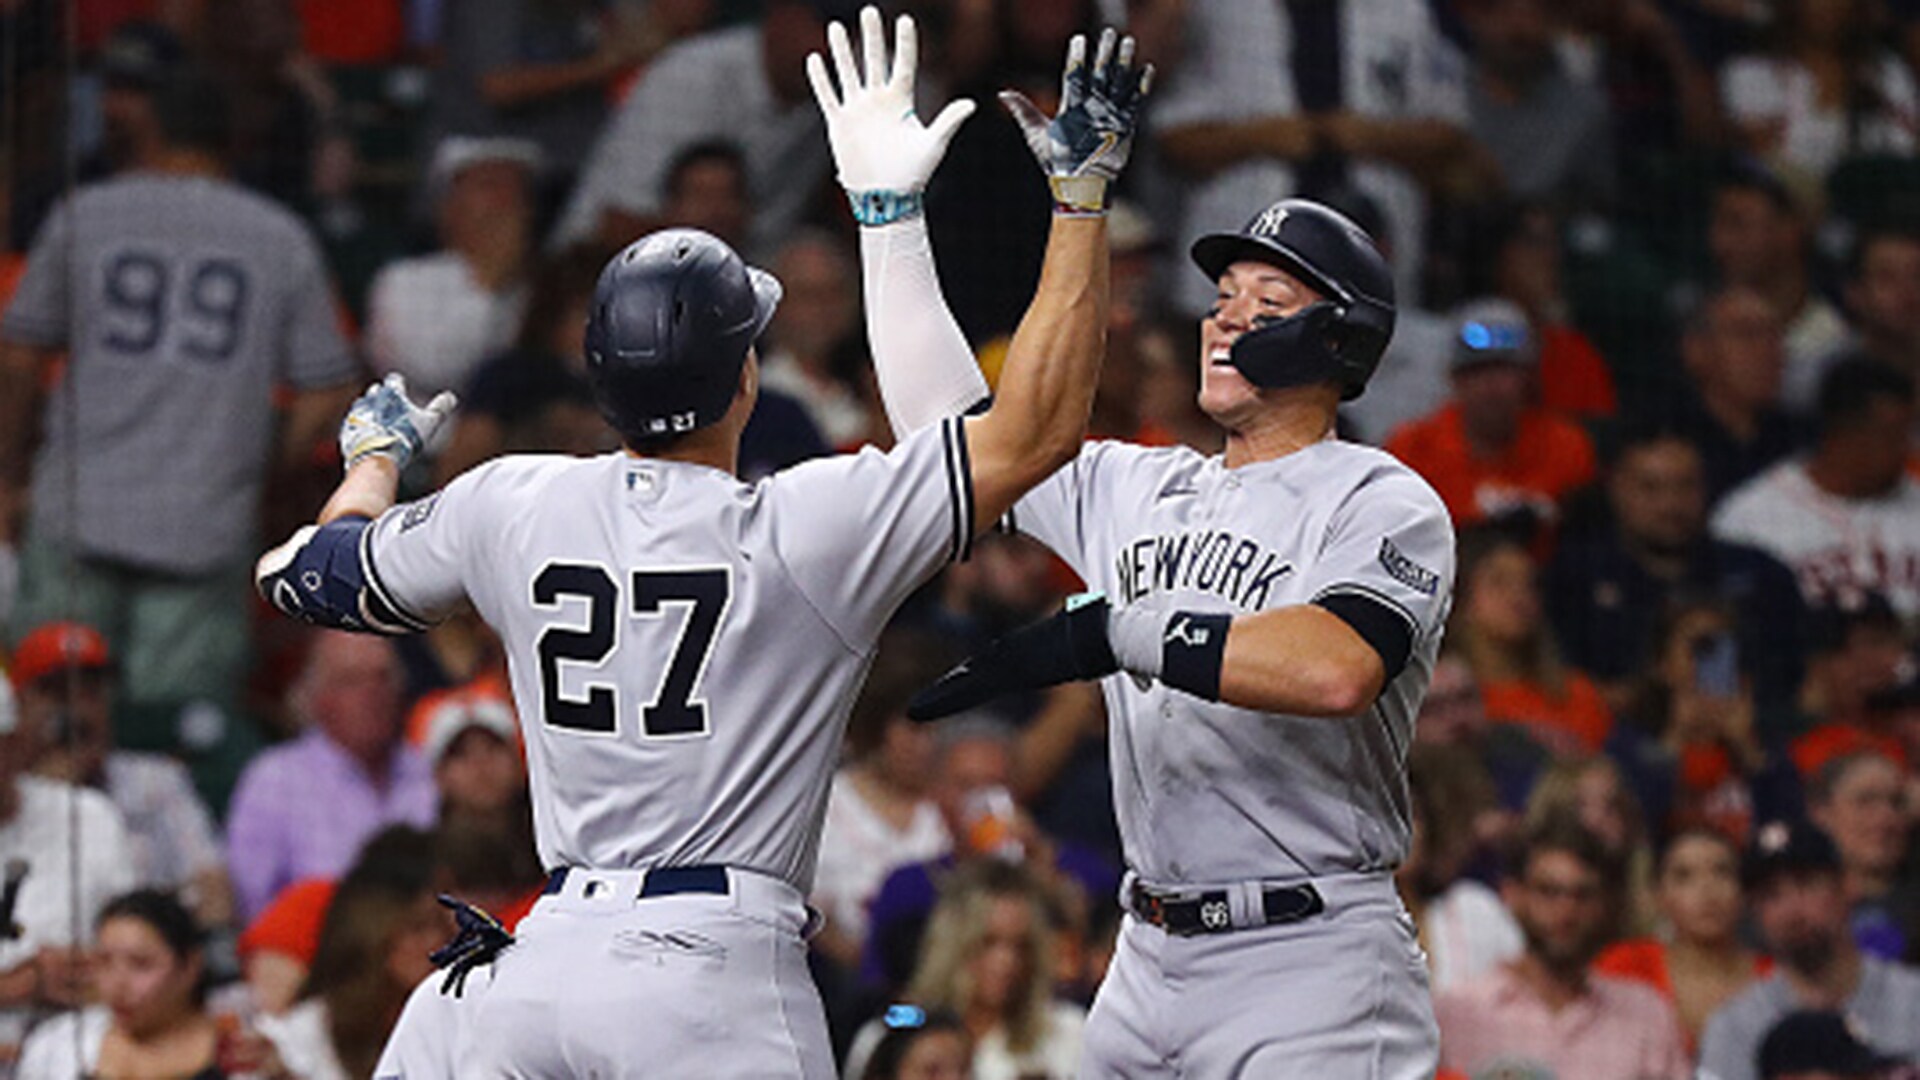 Jasson Domínguez becomes youngest Yankee with HR in 1st at-bat in 6-2 win  over Astros